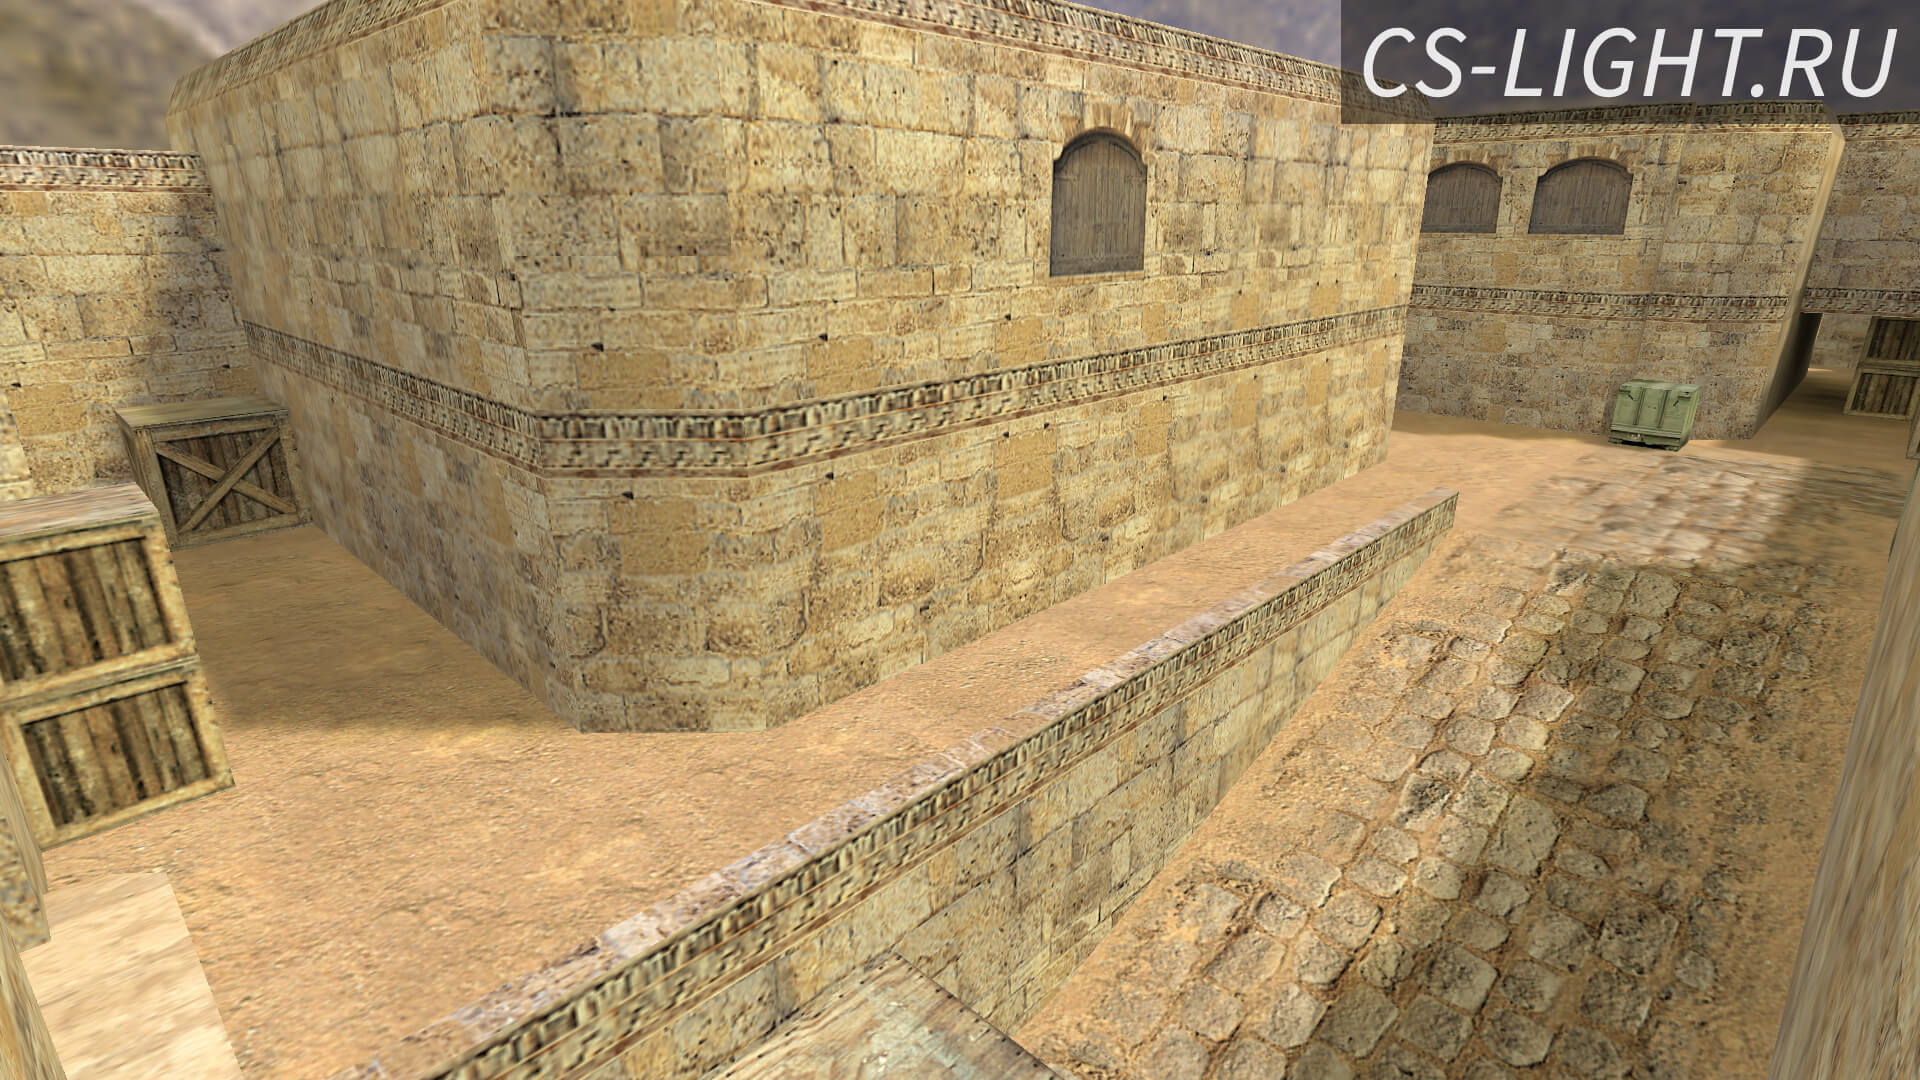 Dust 2 CS 1.6. КС 1.6 de_dust2_2x2 плент в. De Dust Arena 2x2. Counter Strike 1.6 dust2. Даст further